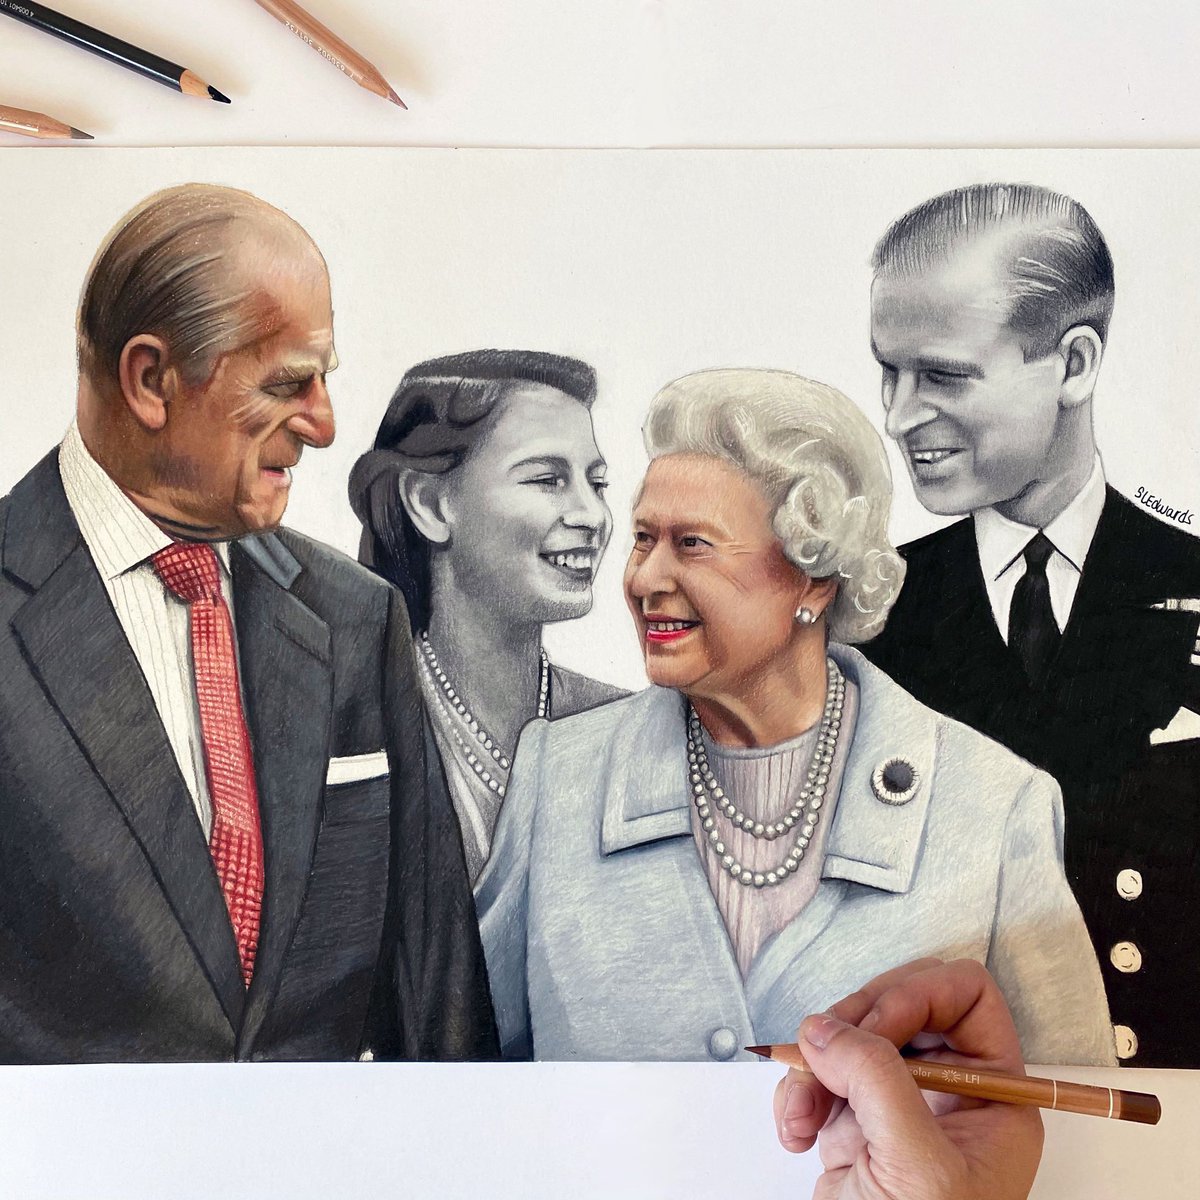 Drawing I have done of Prince Philip and the Queen. RIP Prince Philip ❤️ please share 😊 #PrincePhilip #QueenElizabeth